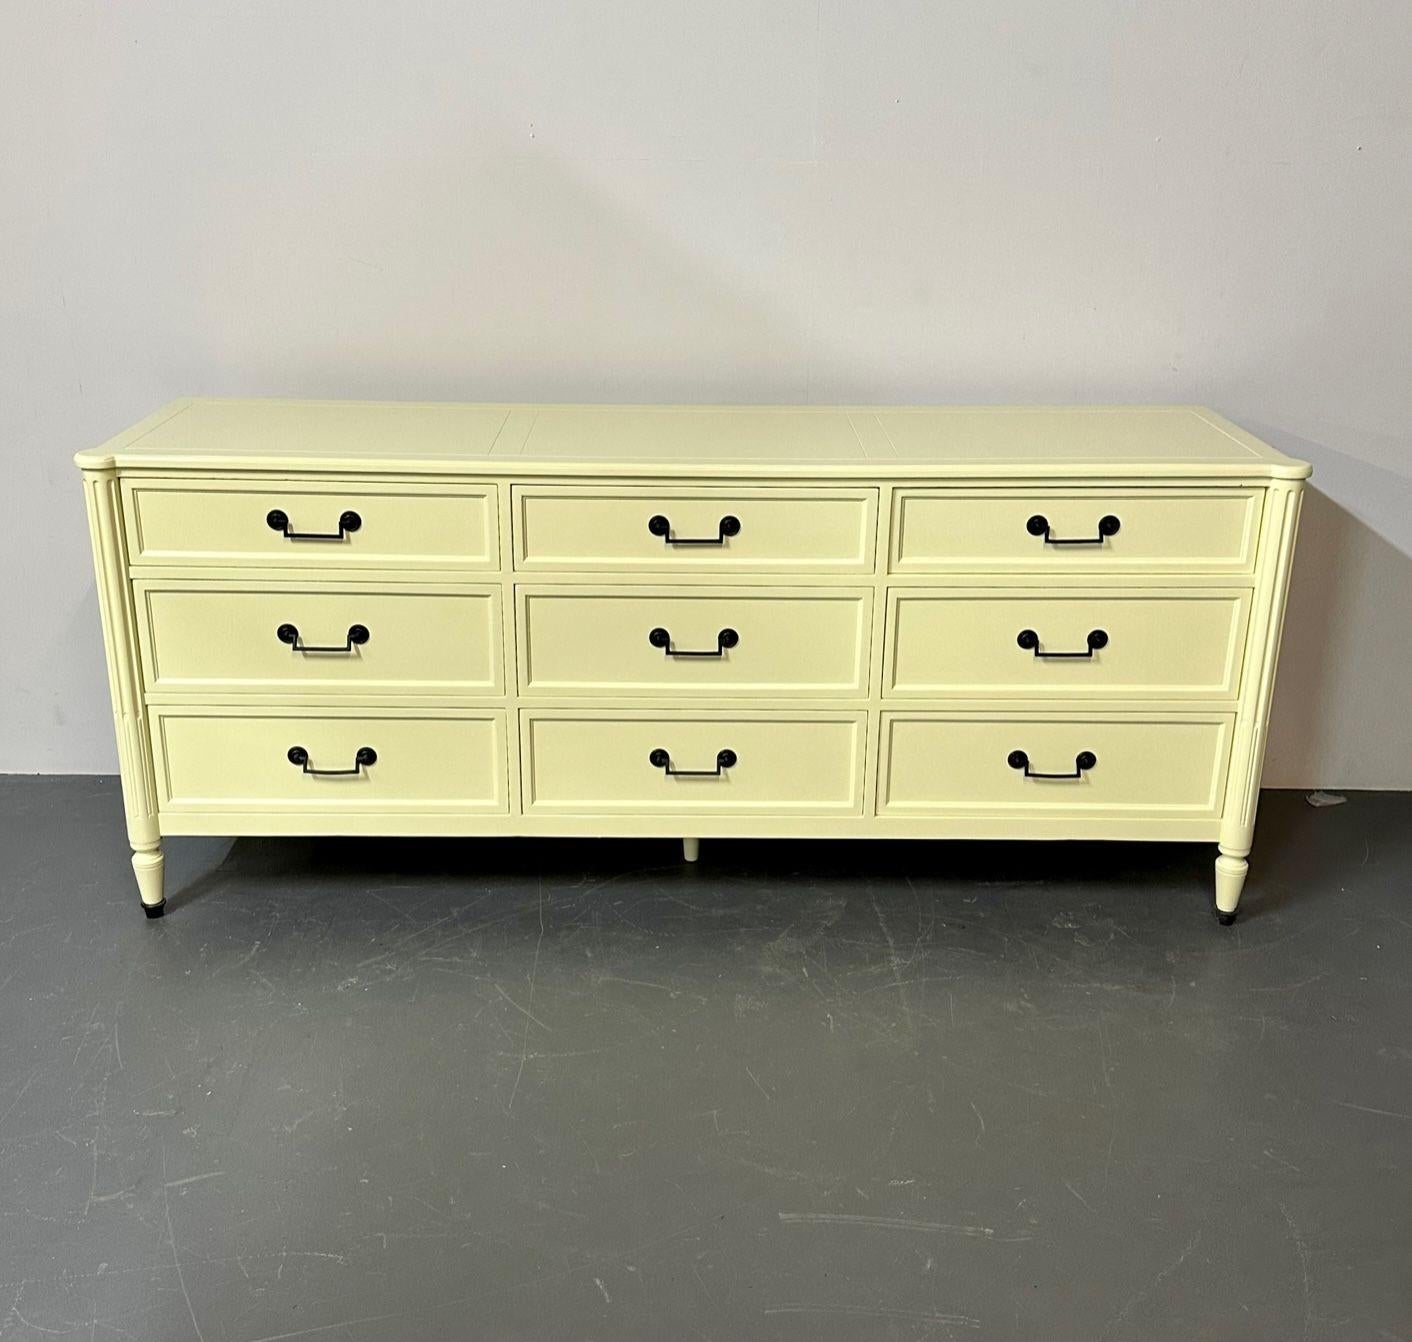 Celadon green dresser / sideboard by Baker, brass handles, Refinished, Regency.
A fine Baker Furniture company, chest in the very popular celadon green with brass drawer pulls done in a complimentary ebony. The case having nine drawers all which